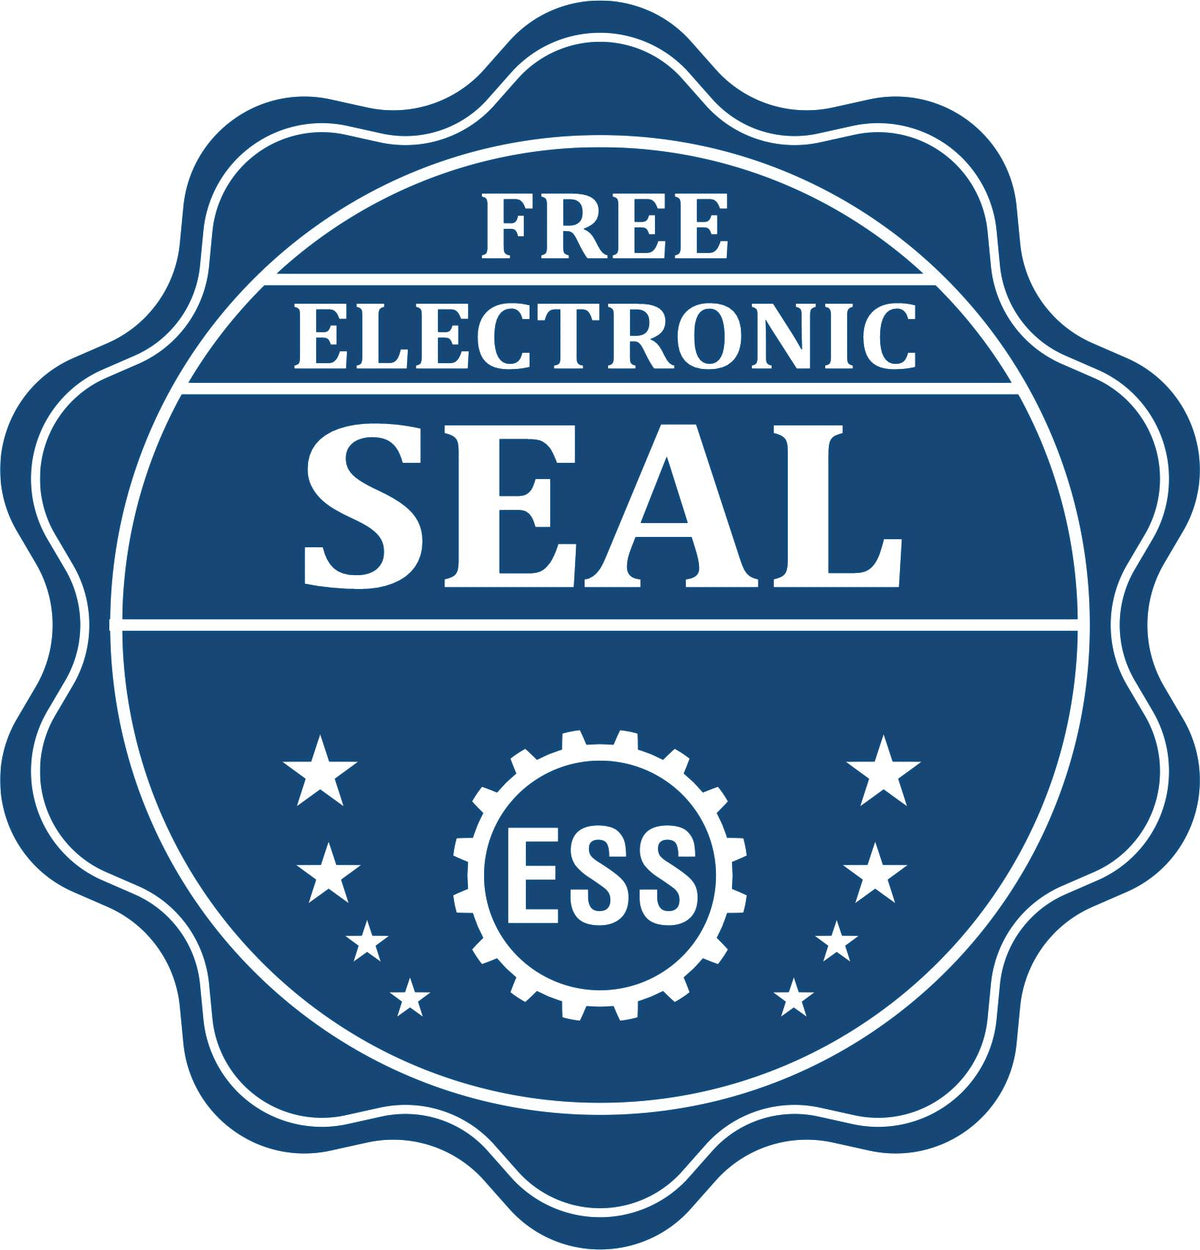 A badge showing a free electronic seal for the State of North Dakota Extended Long Reach Geologist Seal with stars and the ESS gear on the emblem.